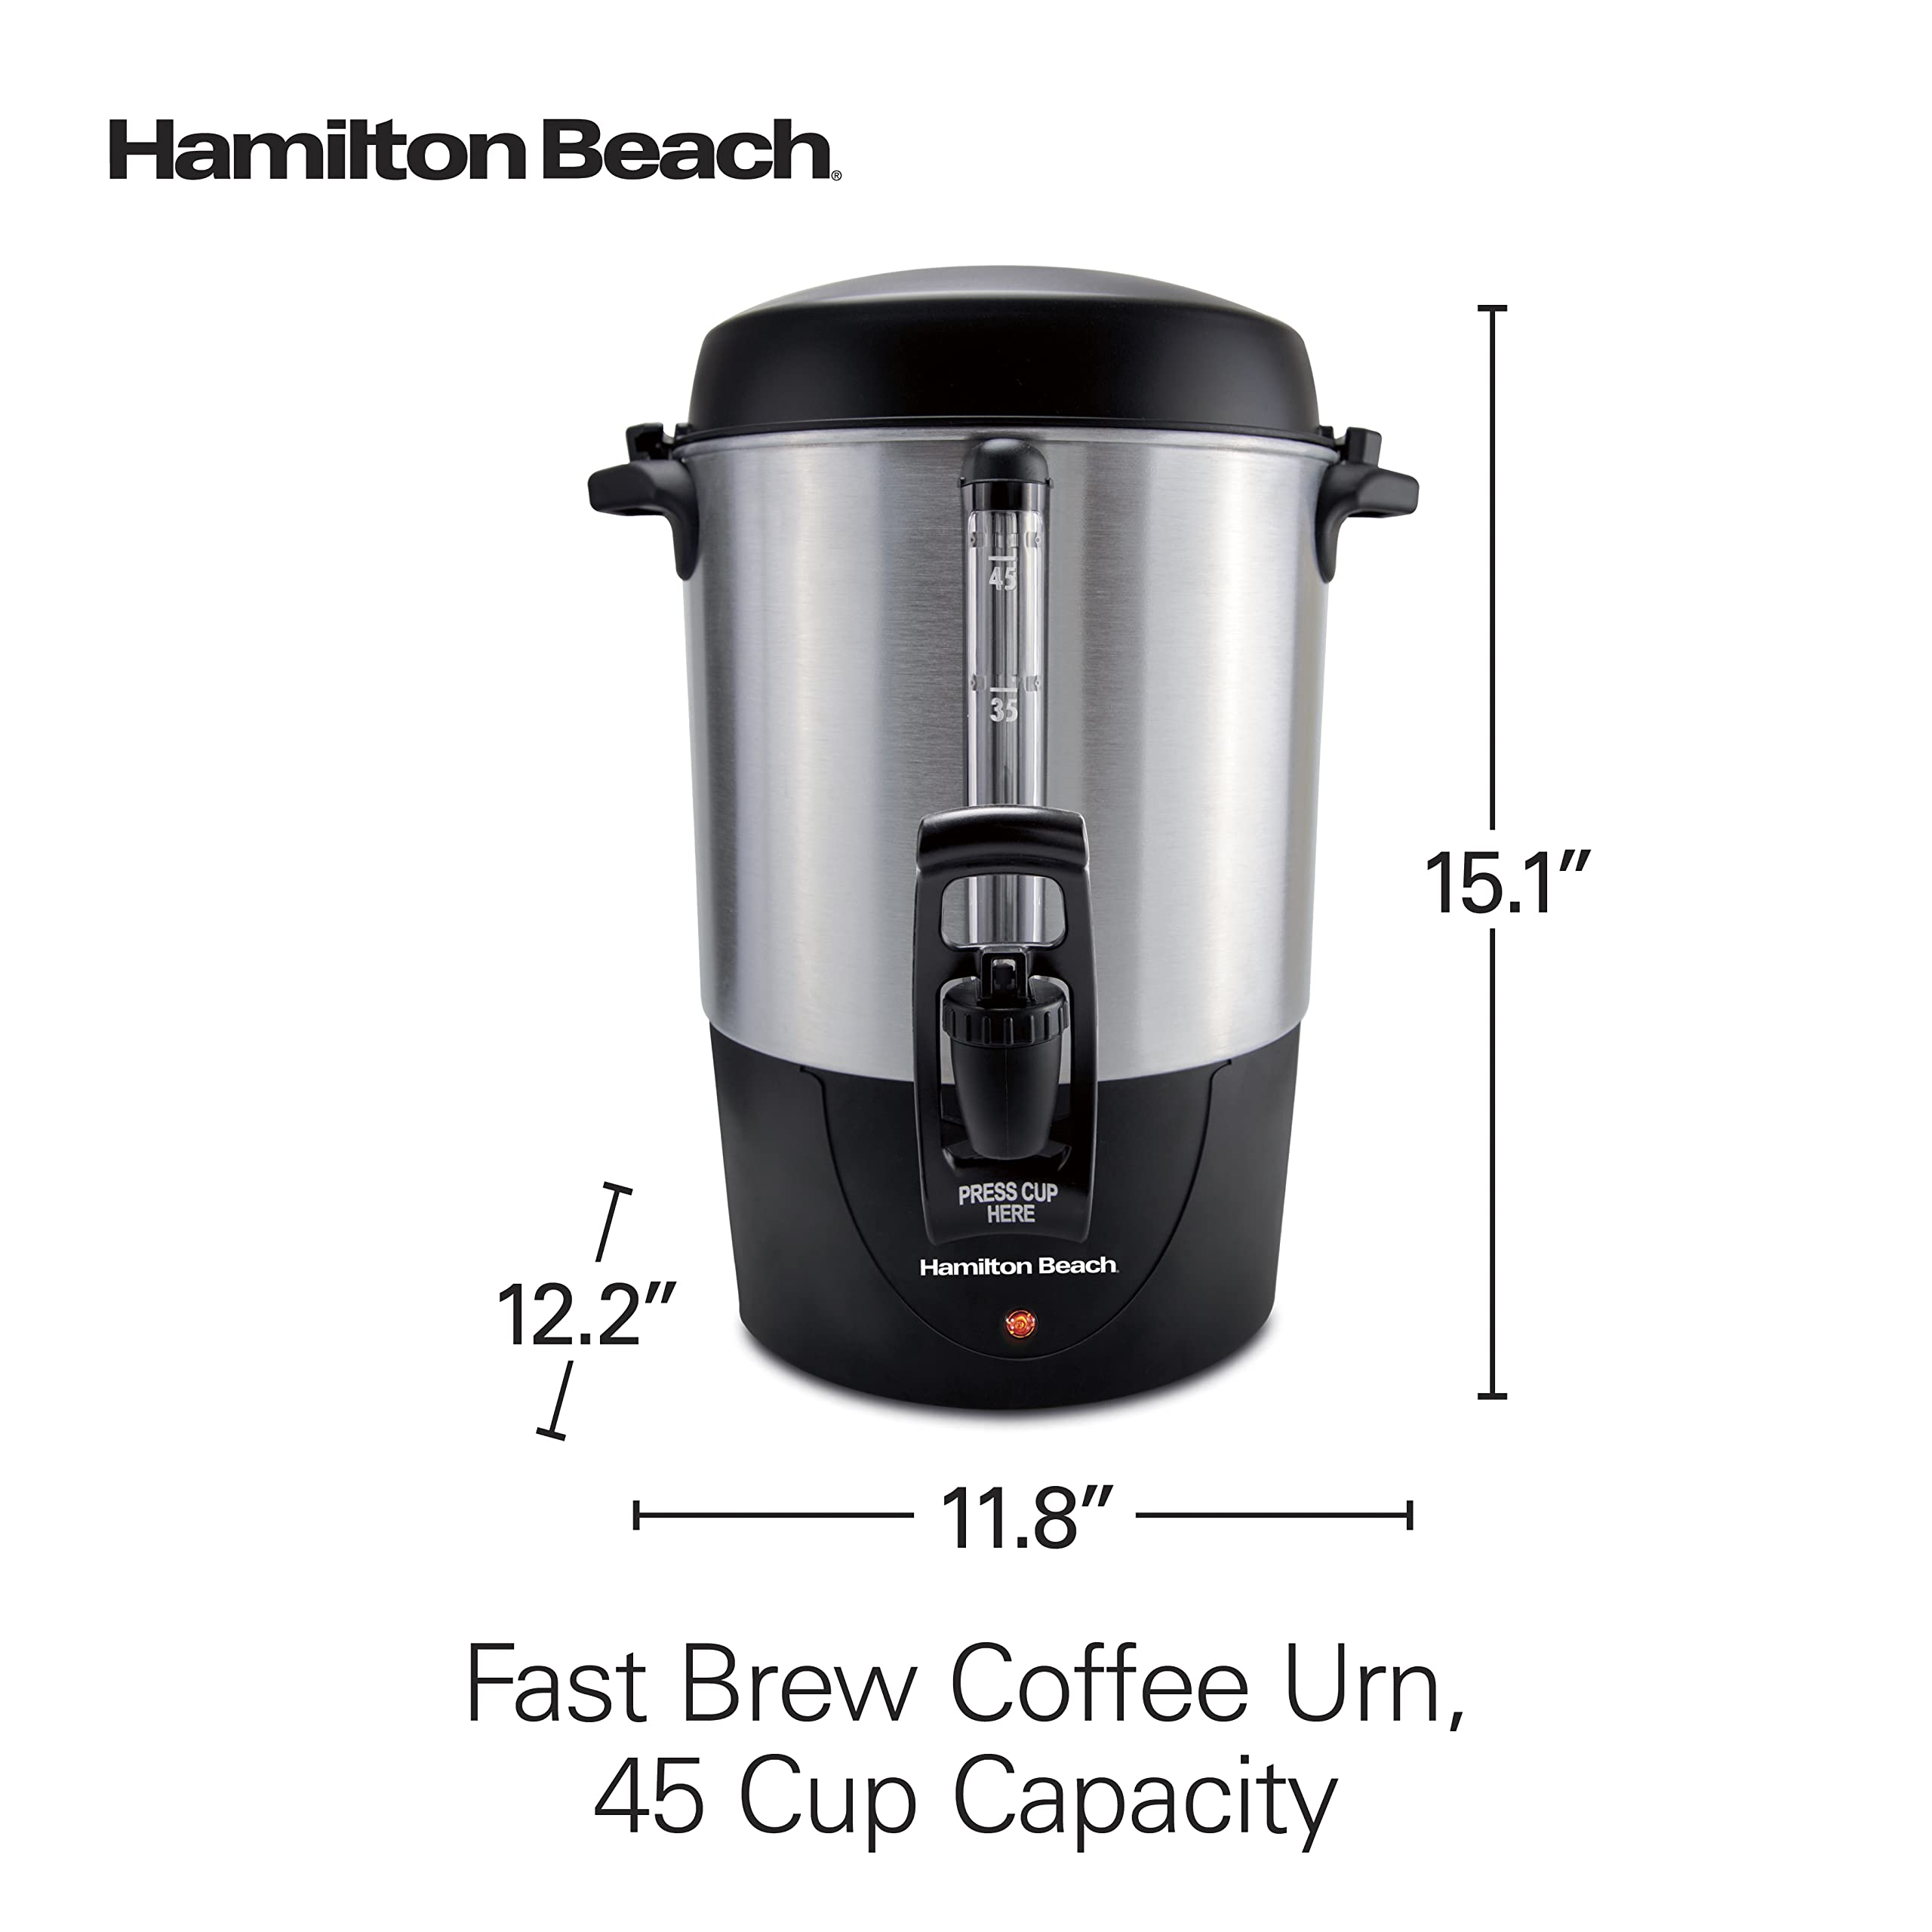 Hamilton Beach 40521 Coffee Urn and Hot Beverage Dispenser, 45 Cup, Fast Brew, Silver